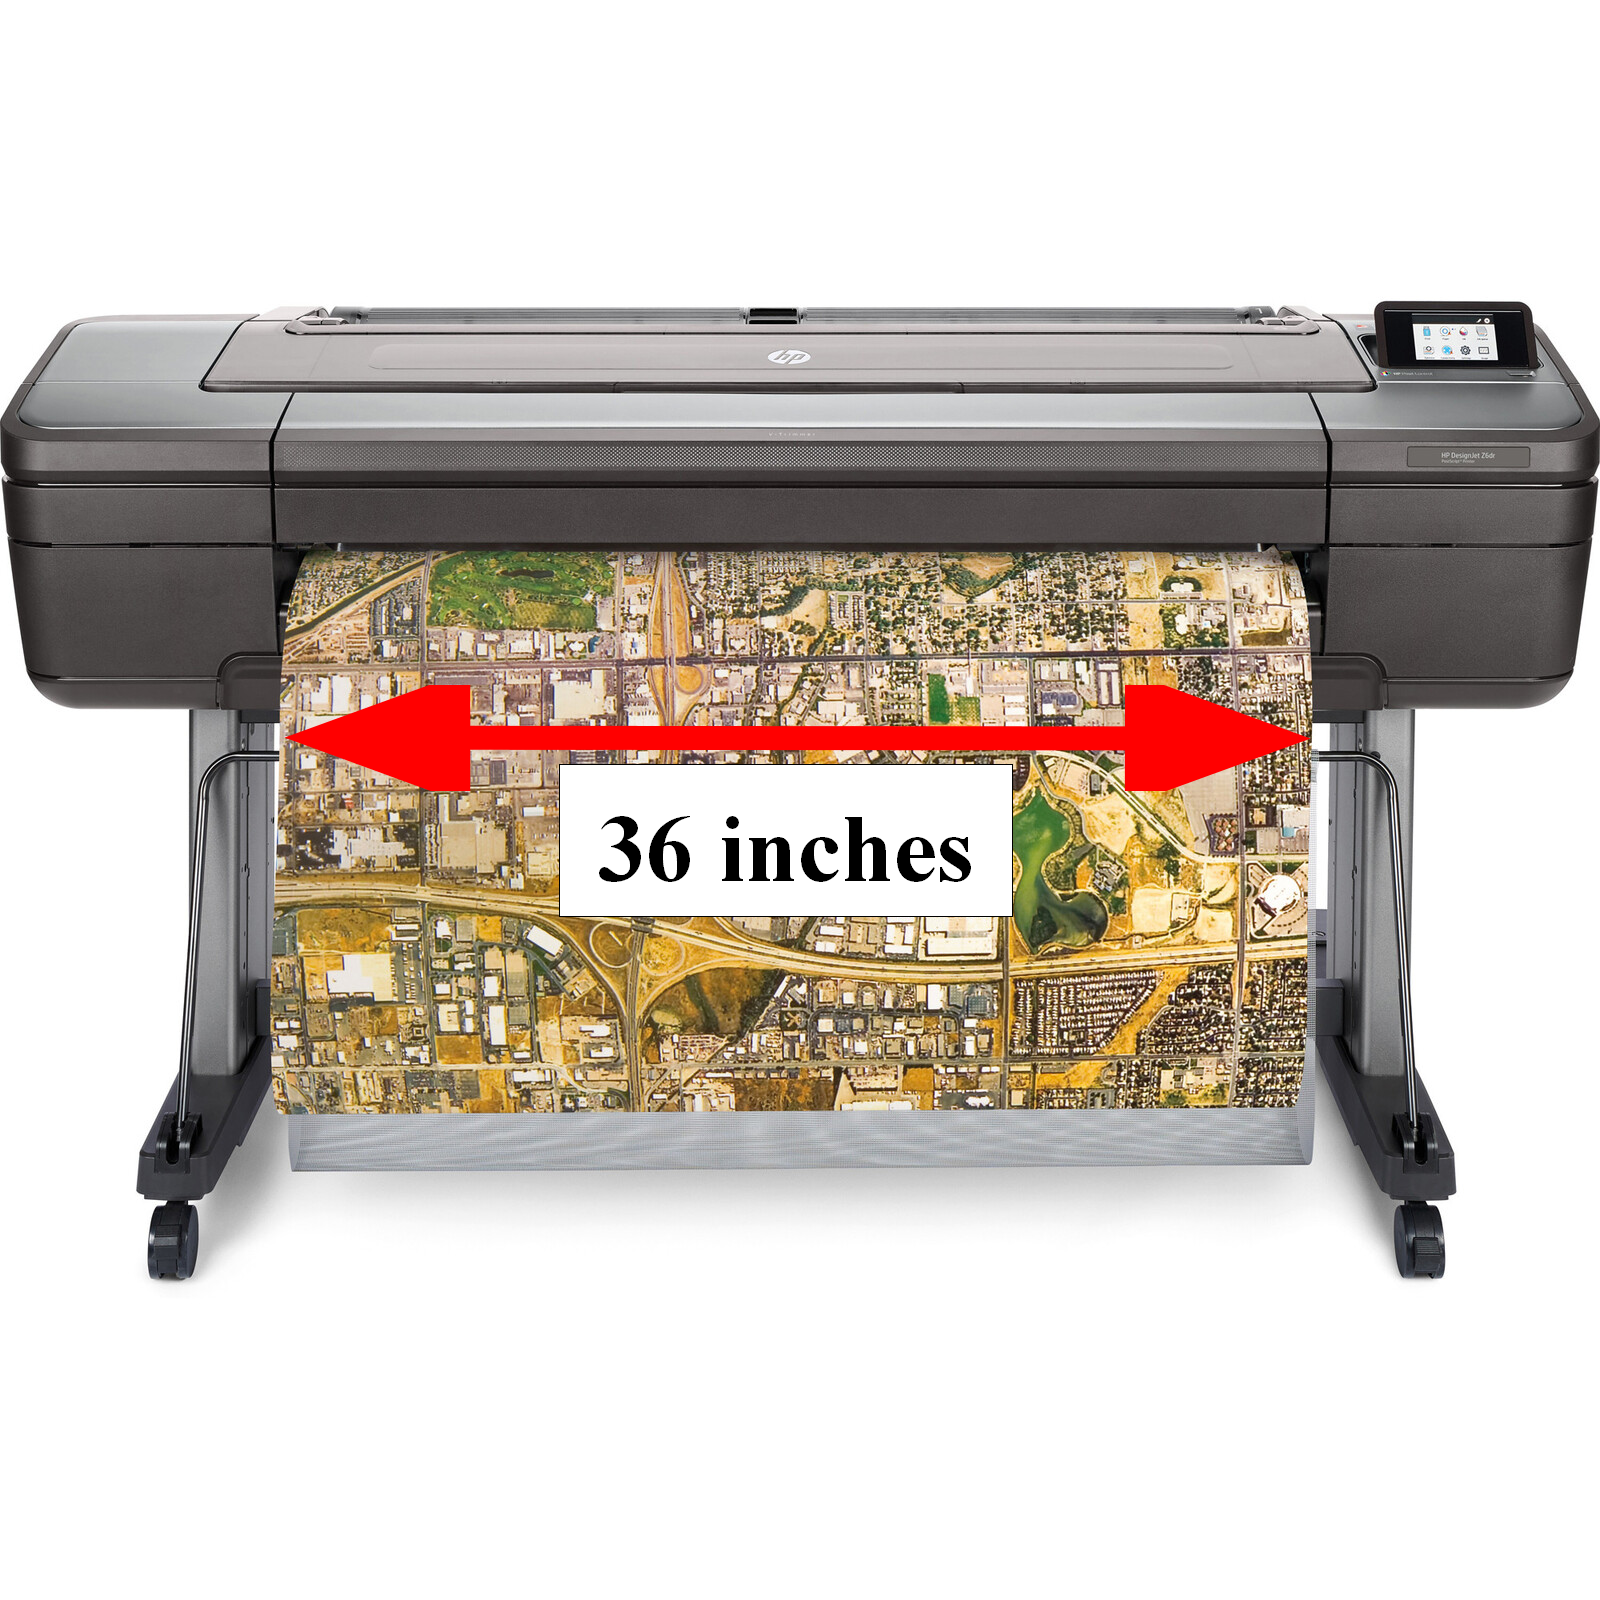 Poster printer paper widht is 36 inches!